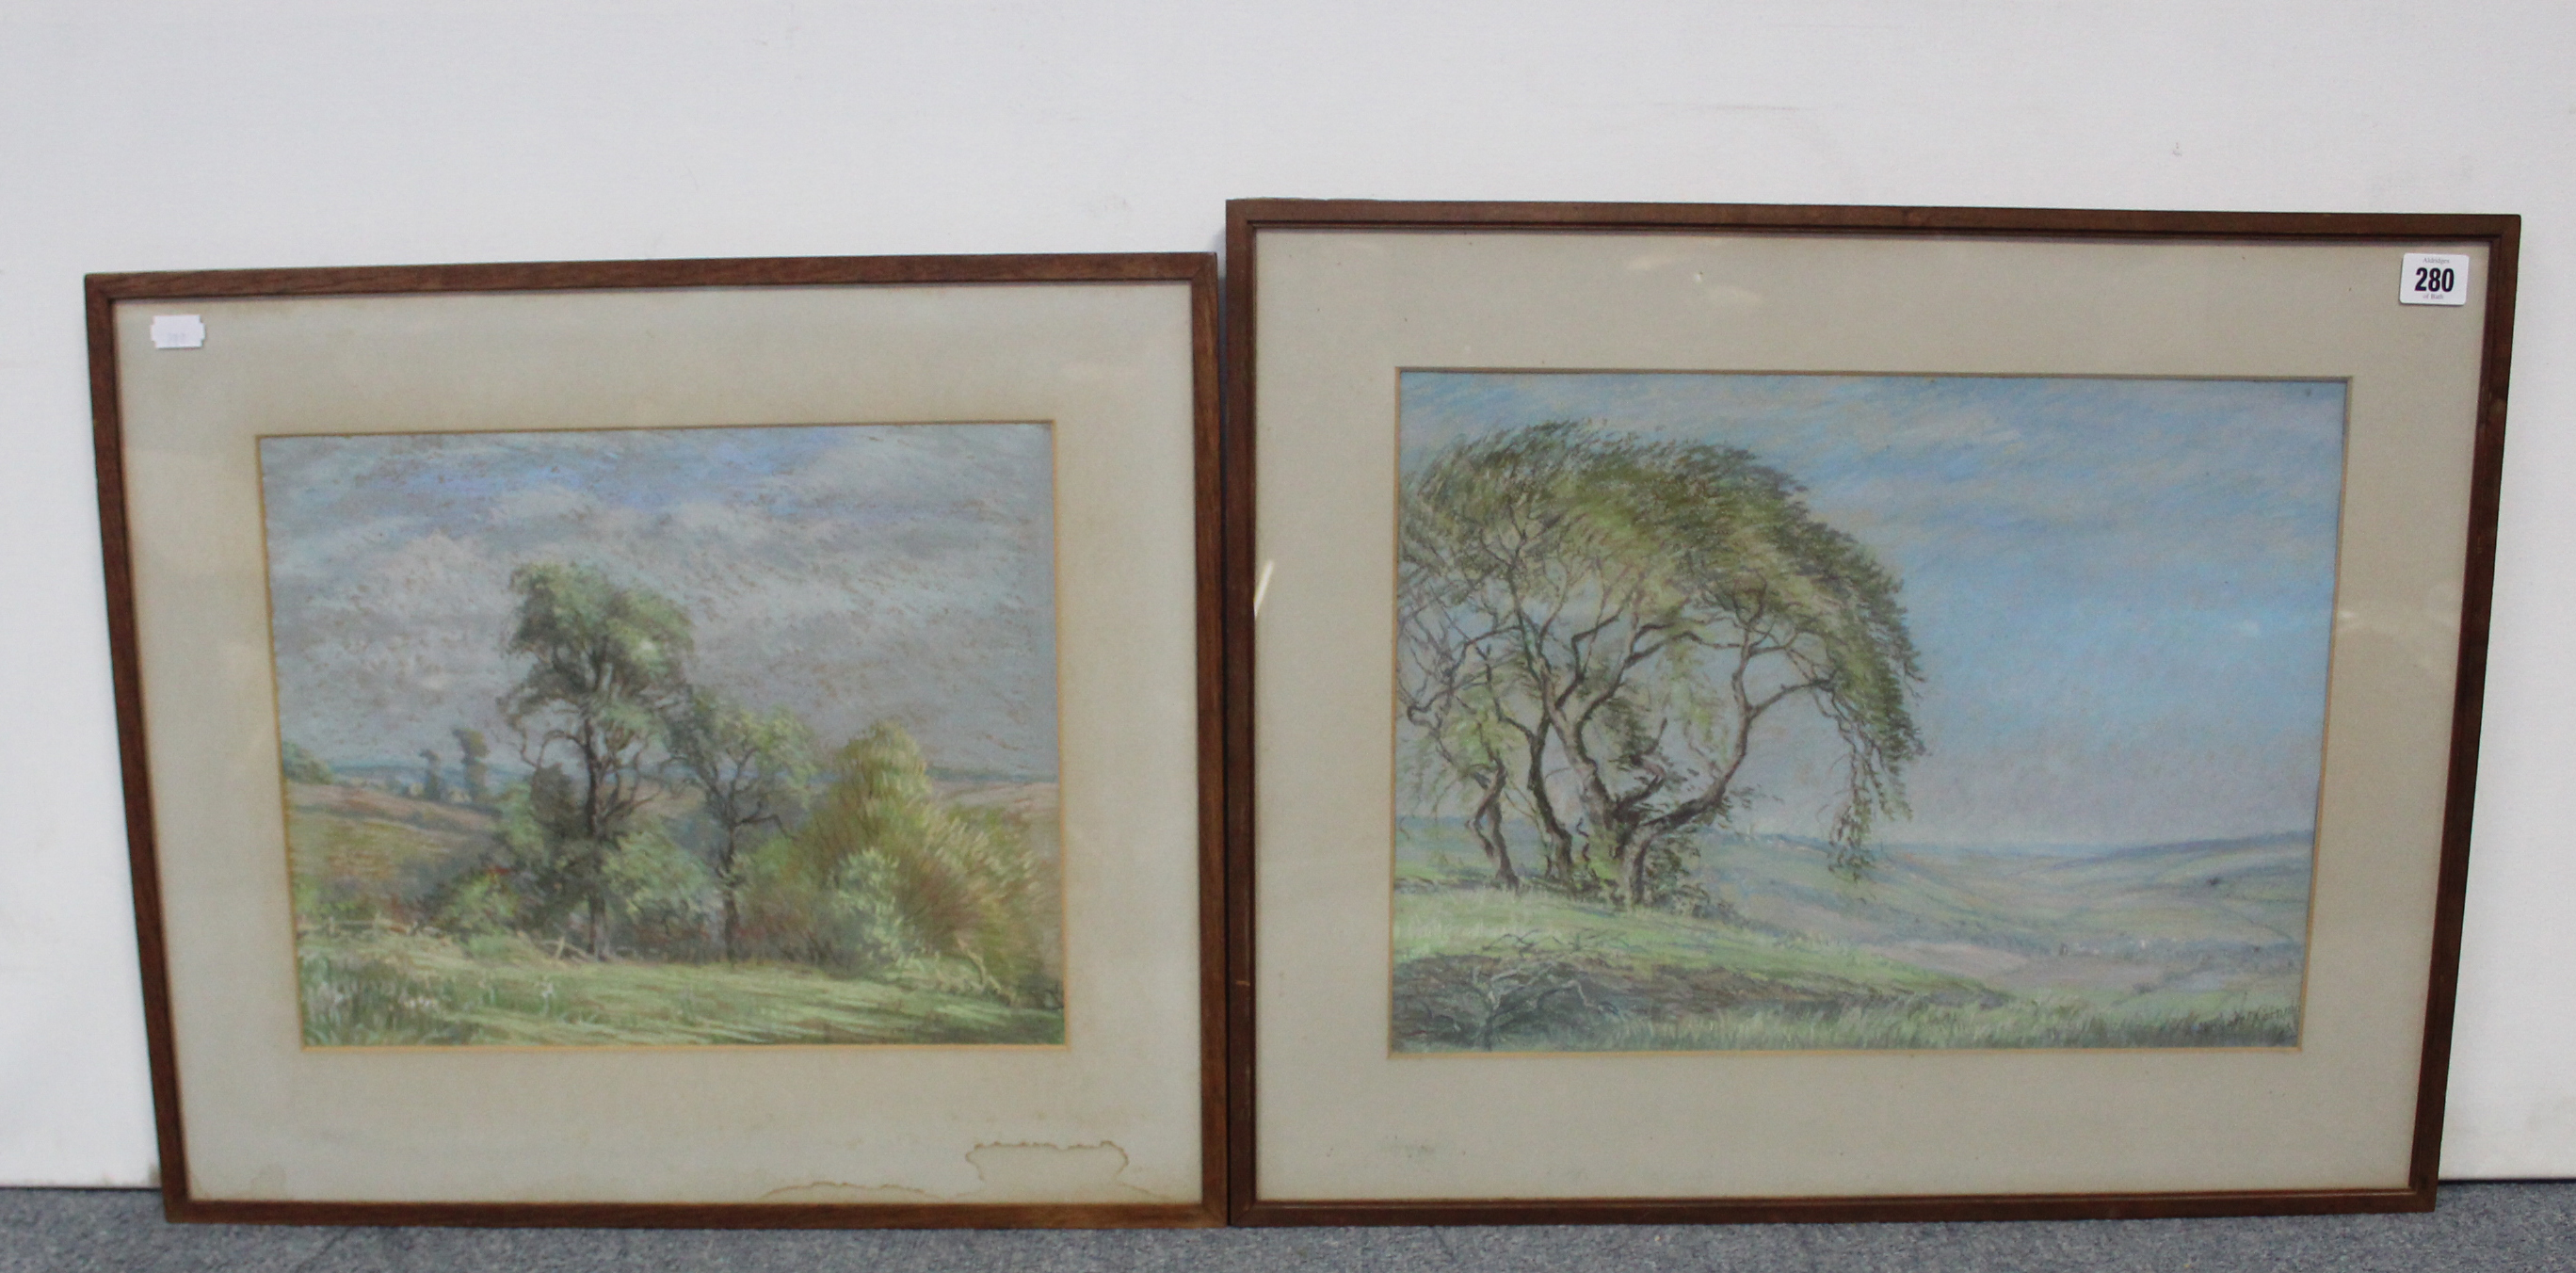 Two sepia naval photographs; a small oil painting on board titled to reverse “In the Vale of Clywd”, - Image 2 of 2